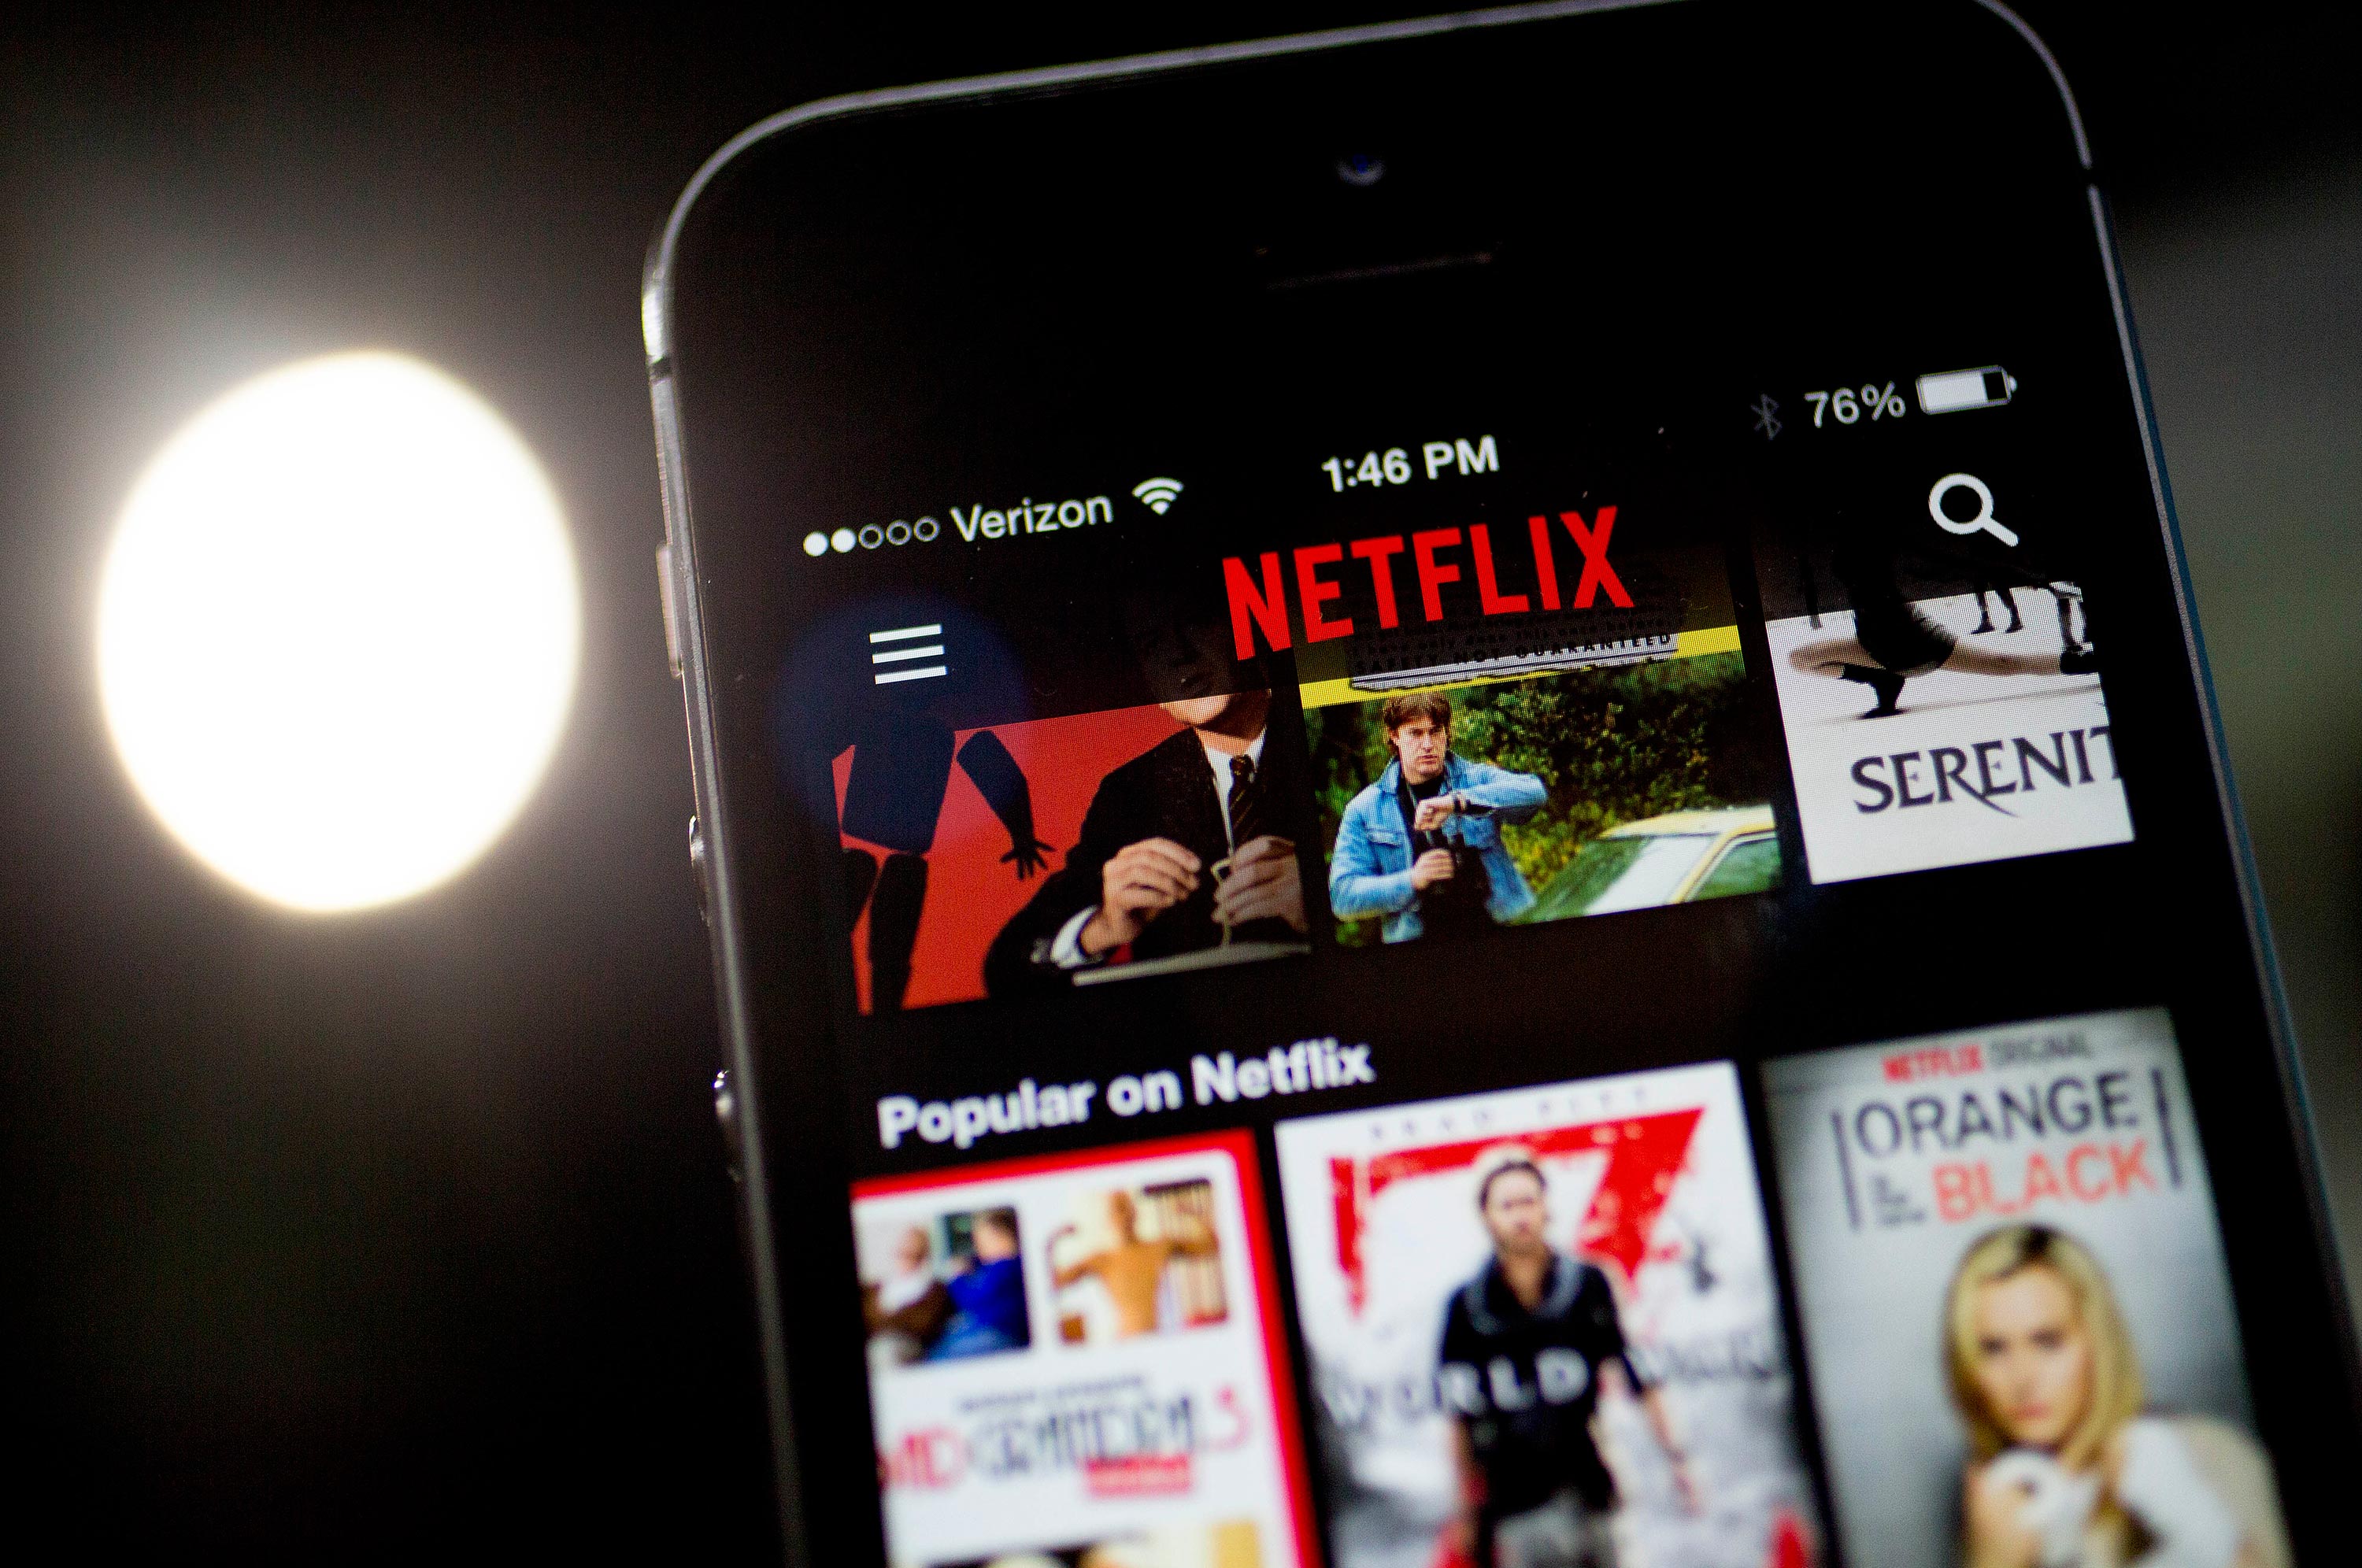 The Netflix Inc. app on an Apple Inc. iPhone 5s including &quot;Orange is the New Black&quot; series on July 9, 2014. &quot;House of Cards,&quot; and &quot;Orange Is the New Black,&quot; two Netflix Inc. series that have boosted the popularity of online viewing, will compete for television's top honors as nominees for Emmy awards in drama and comedy. Photographer: Andrew Harrer/Bloomberg